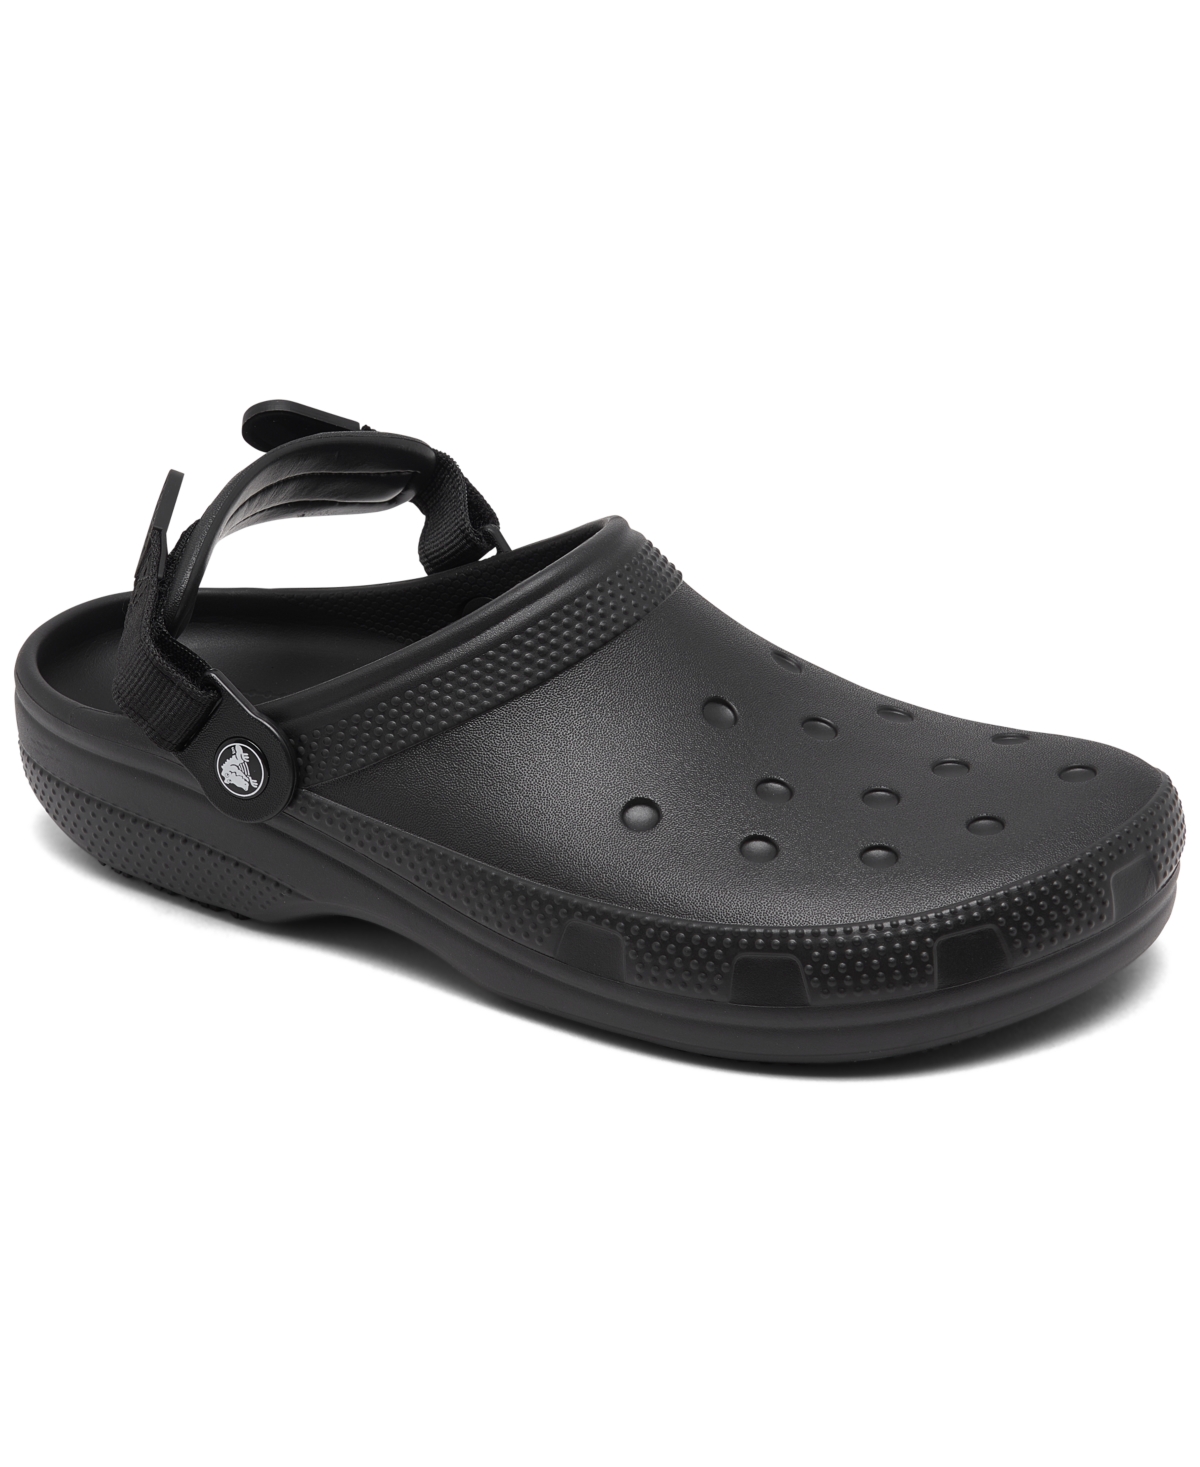 Men's and Women's On-The-Clock Work Slip-On Clogs from Finish Line - Black